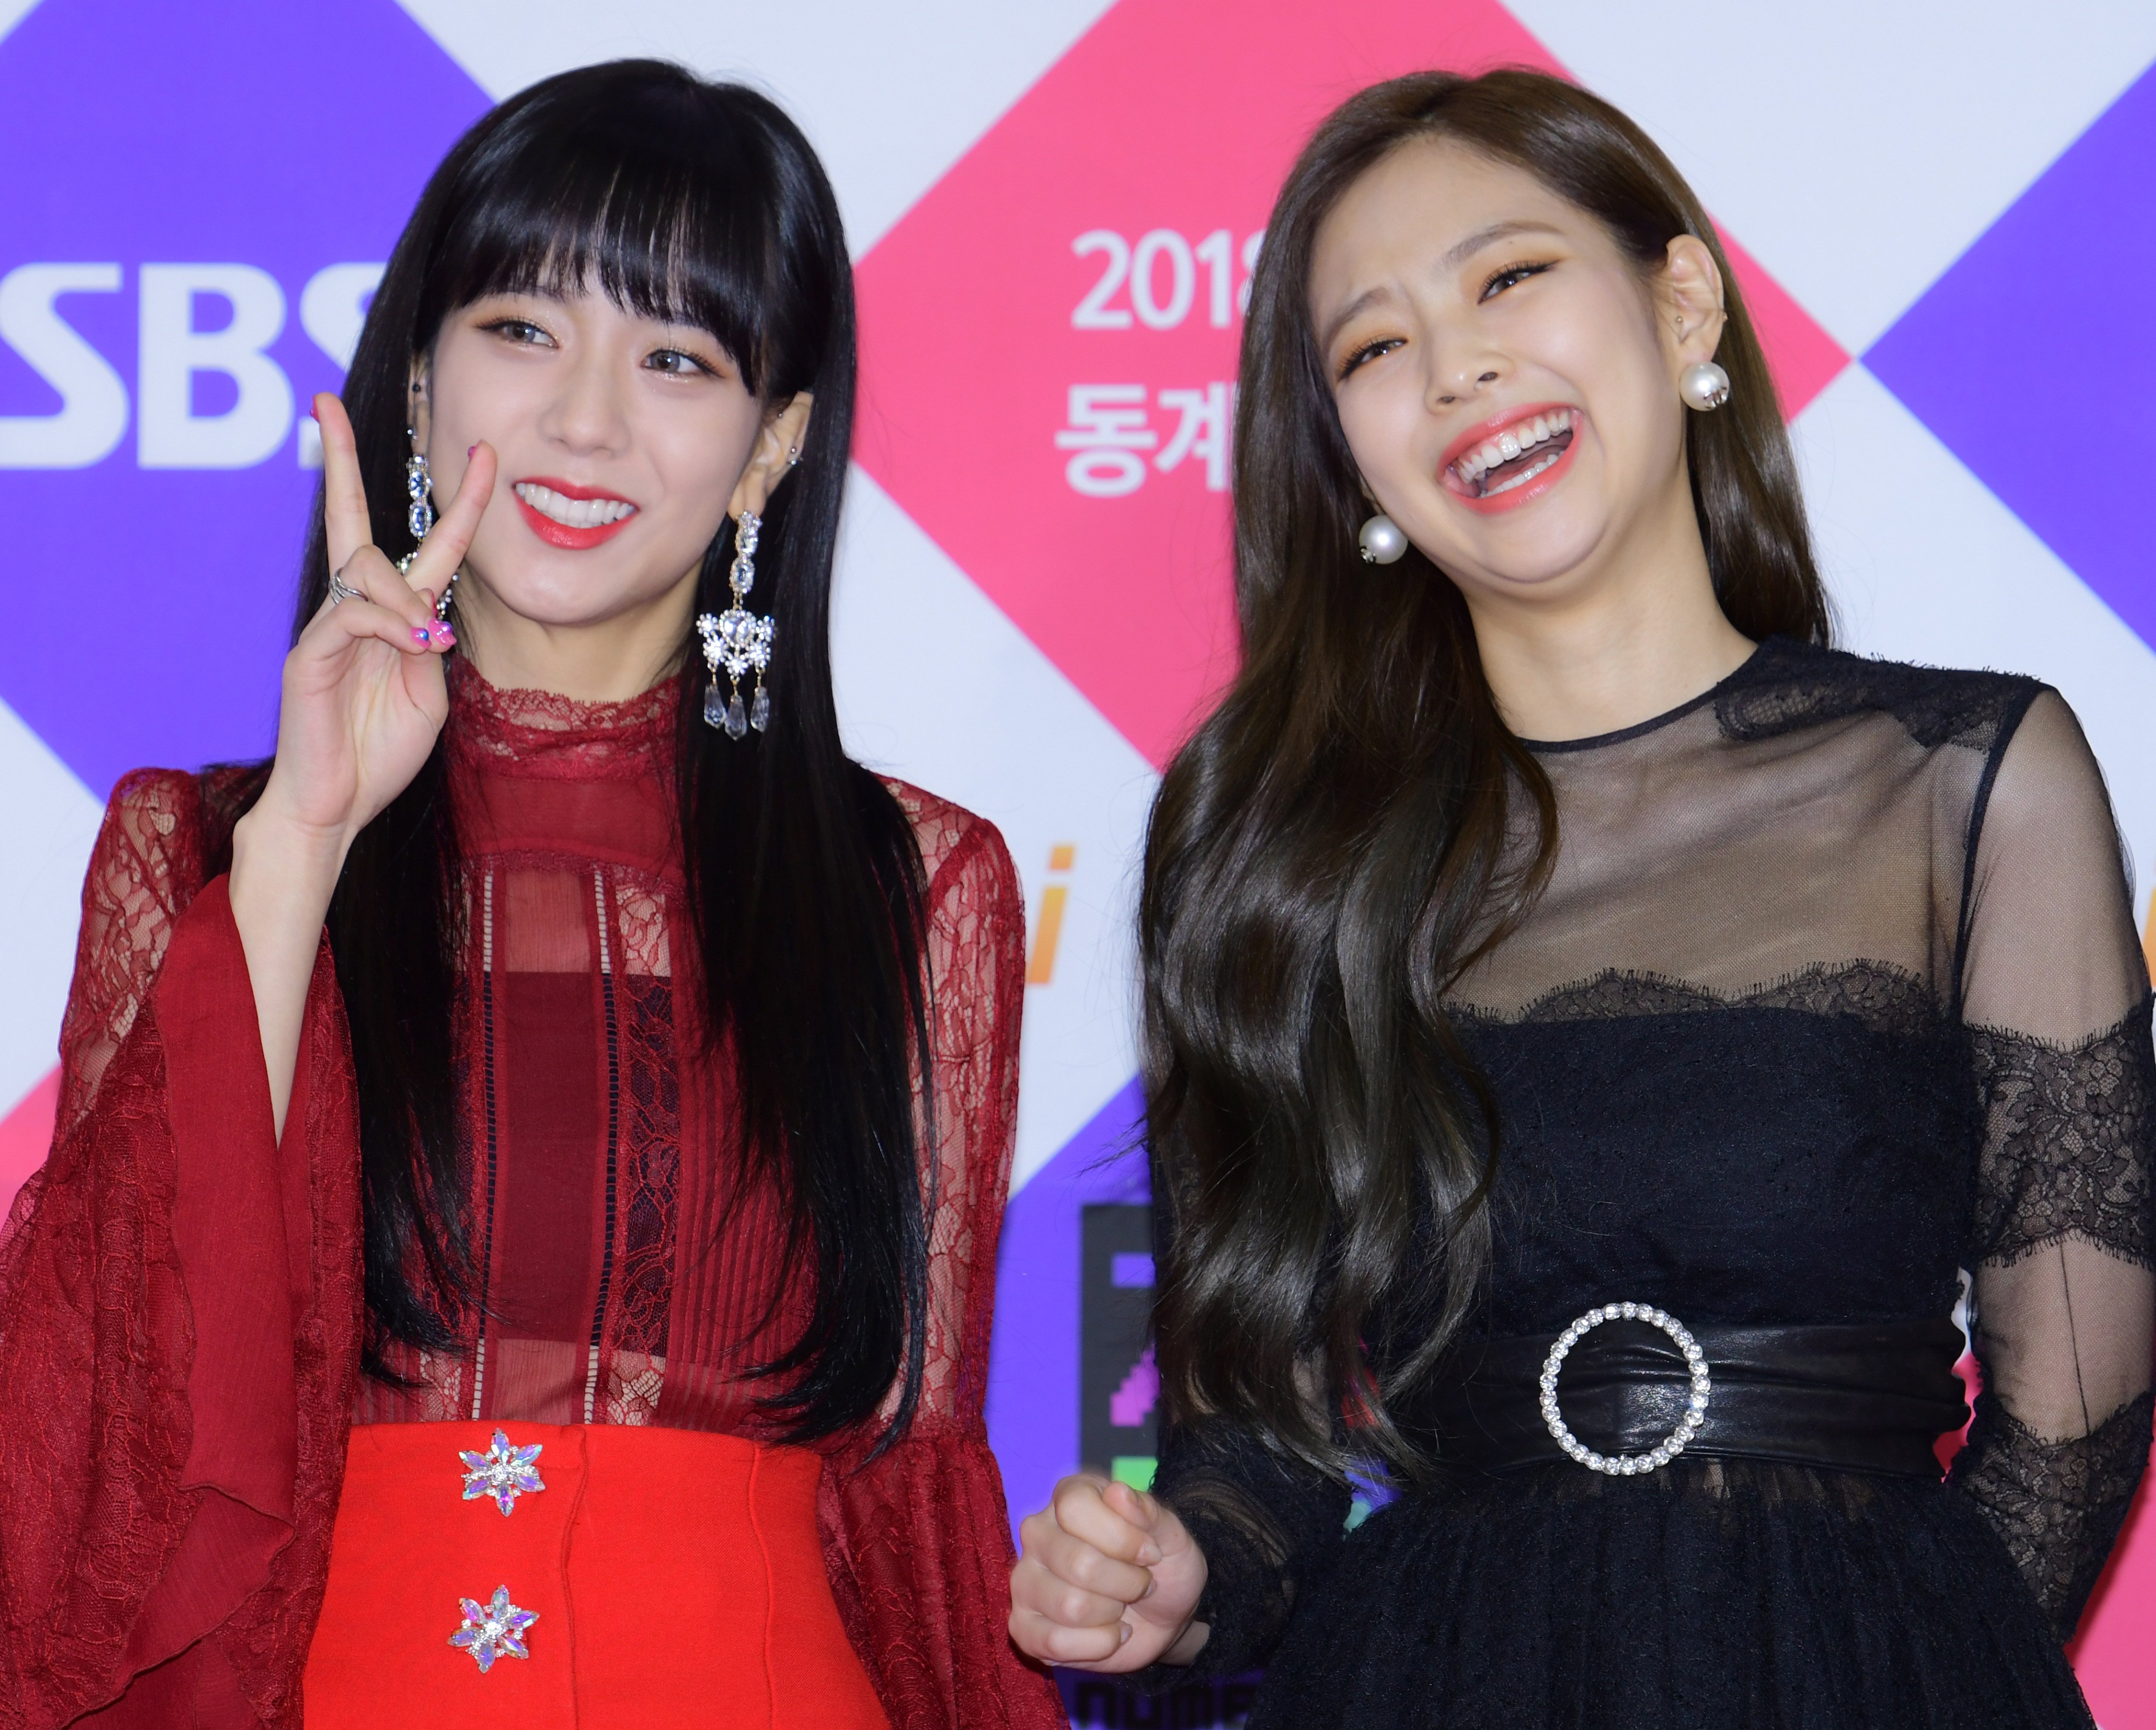 Jisoo and Jennie of Blackpink. Photo: Getty Images